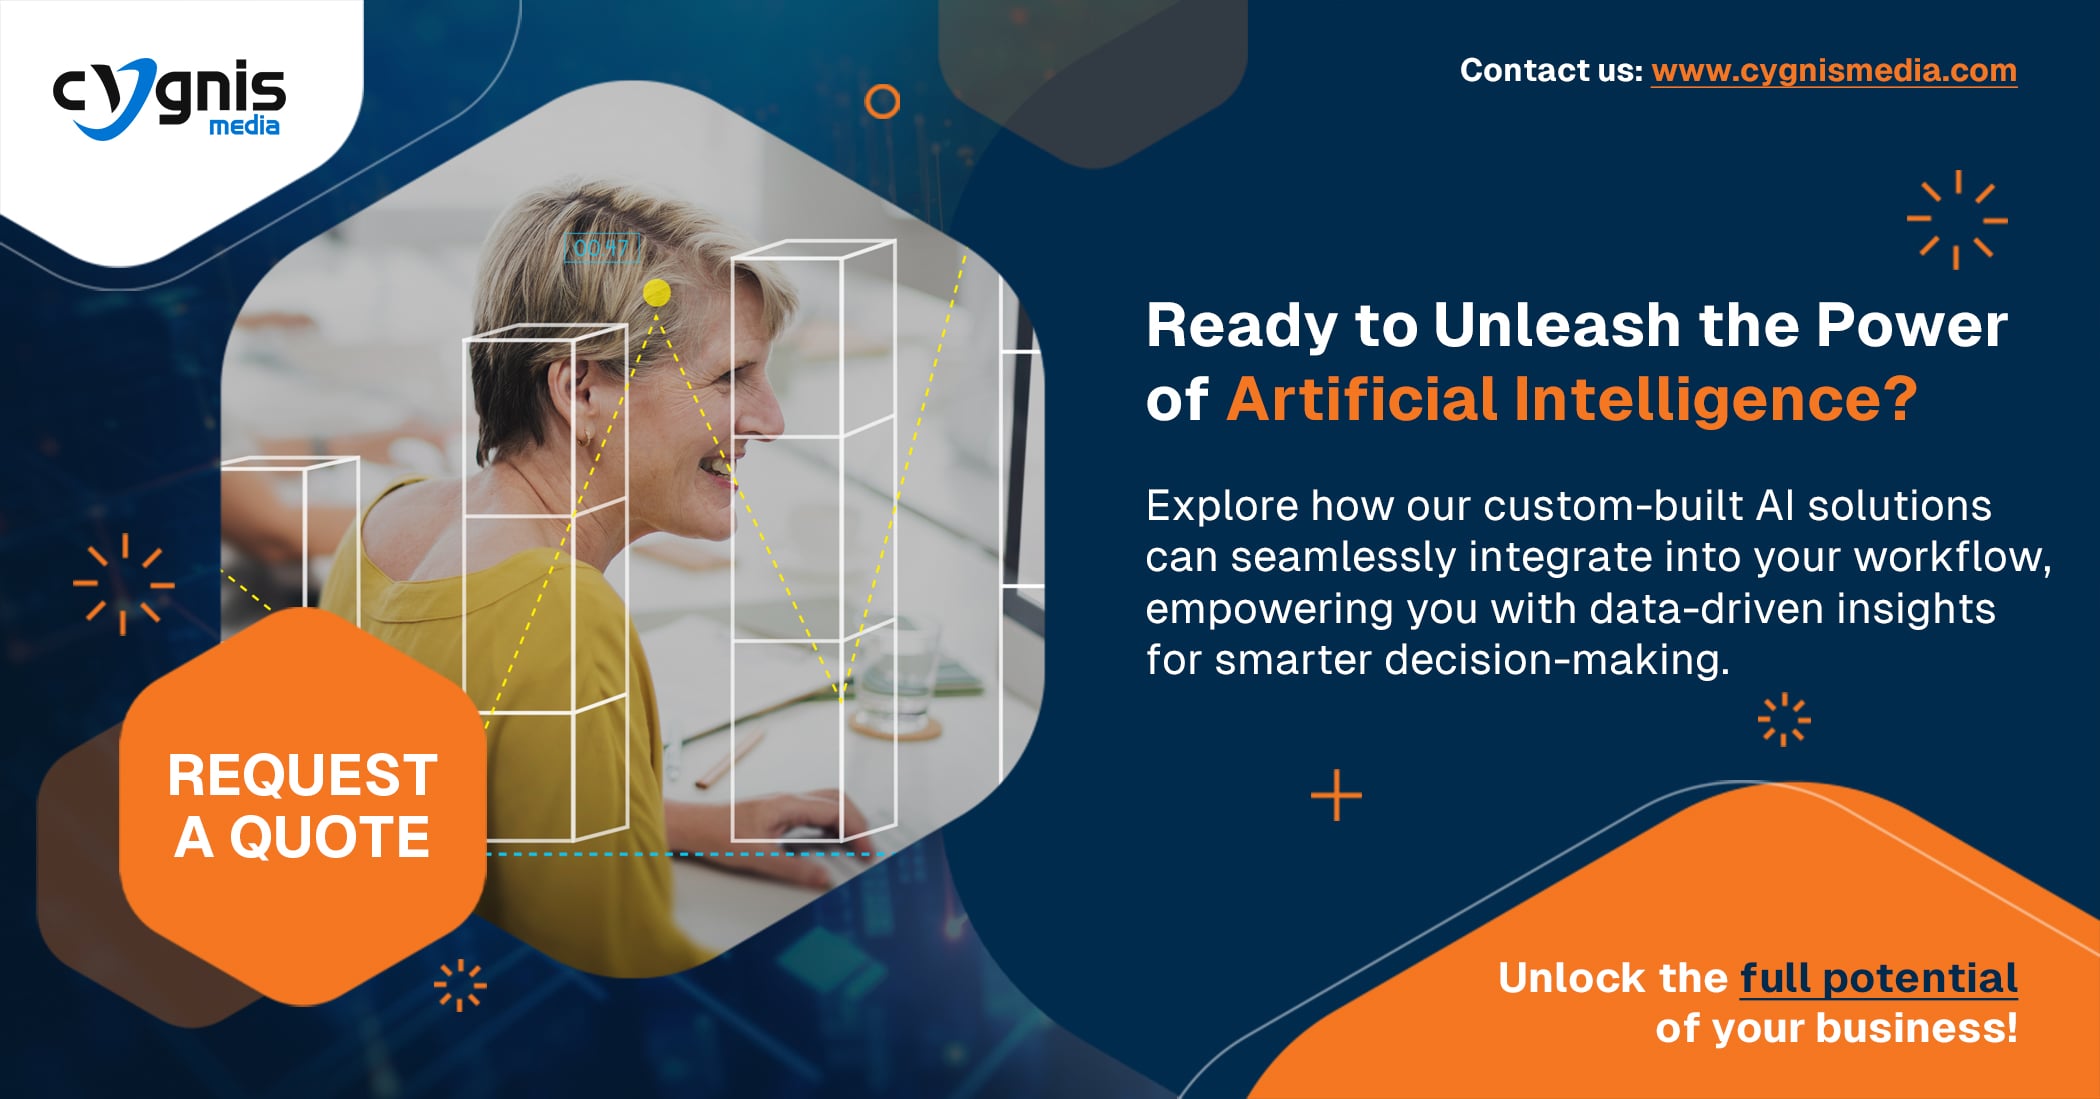 Ready to Unleash the Power of Artificial Intelligence?